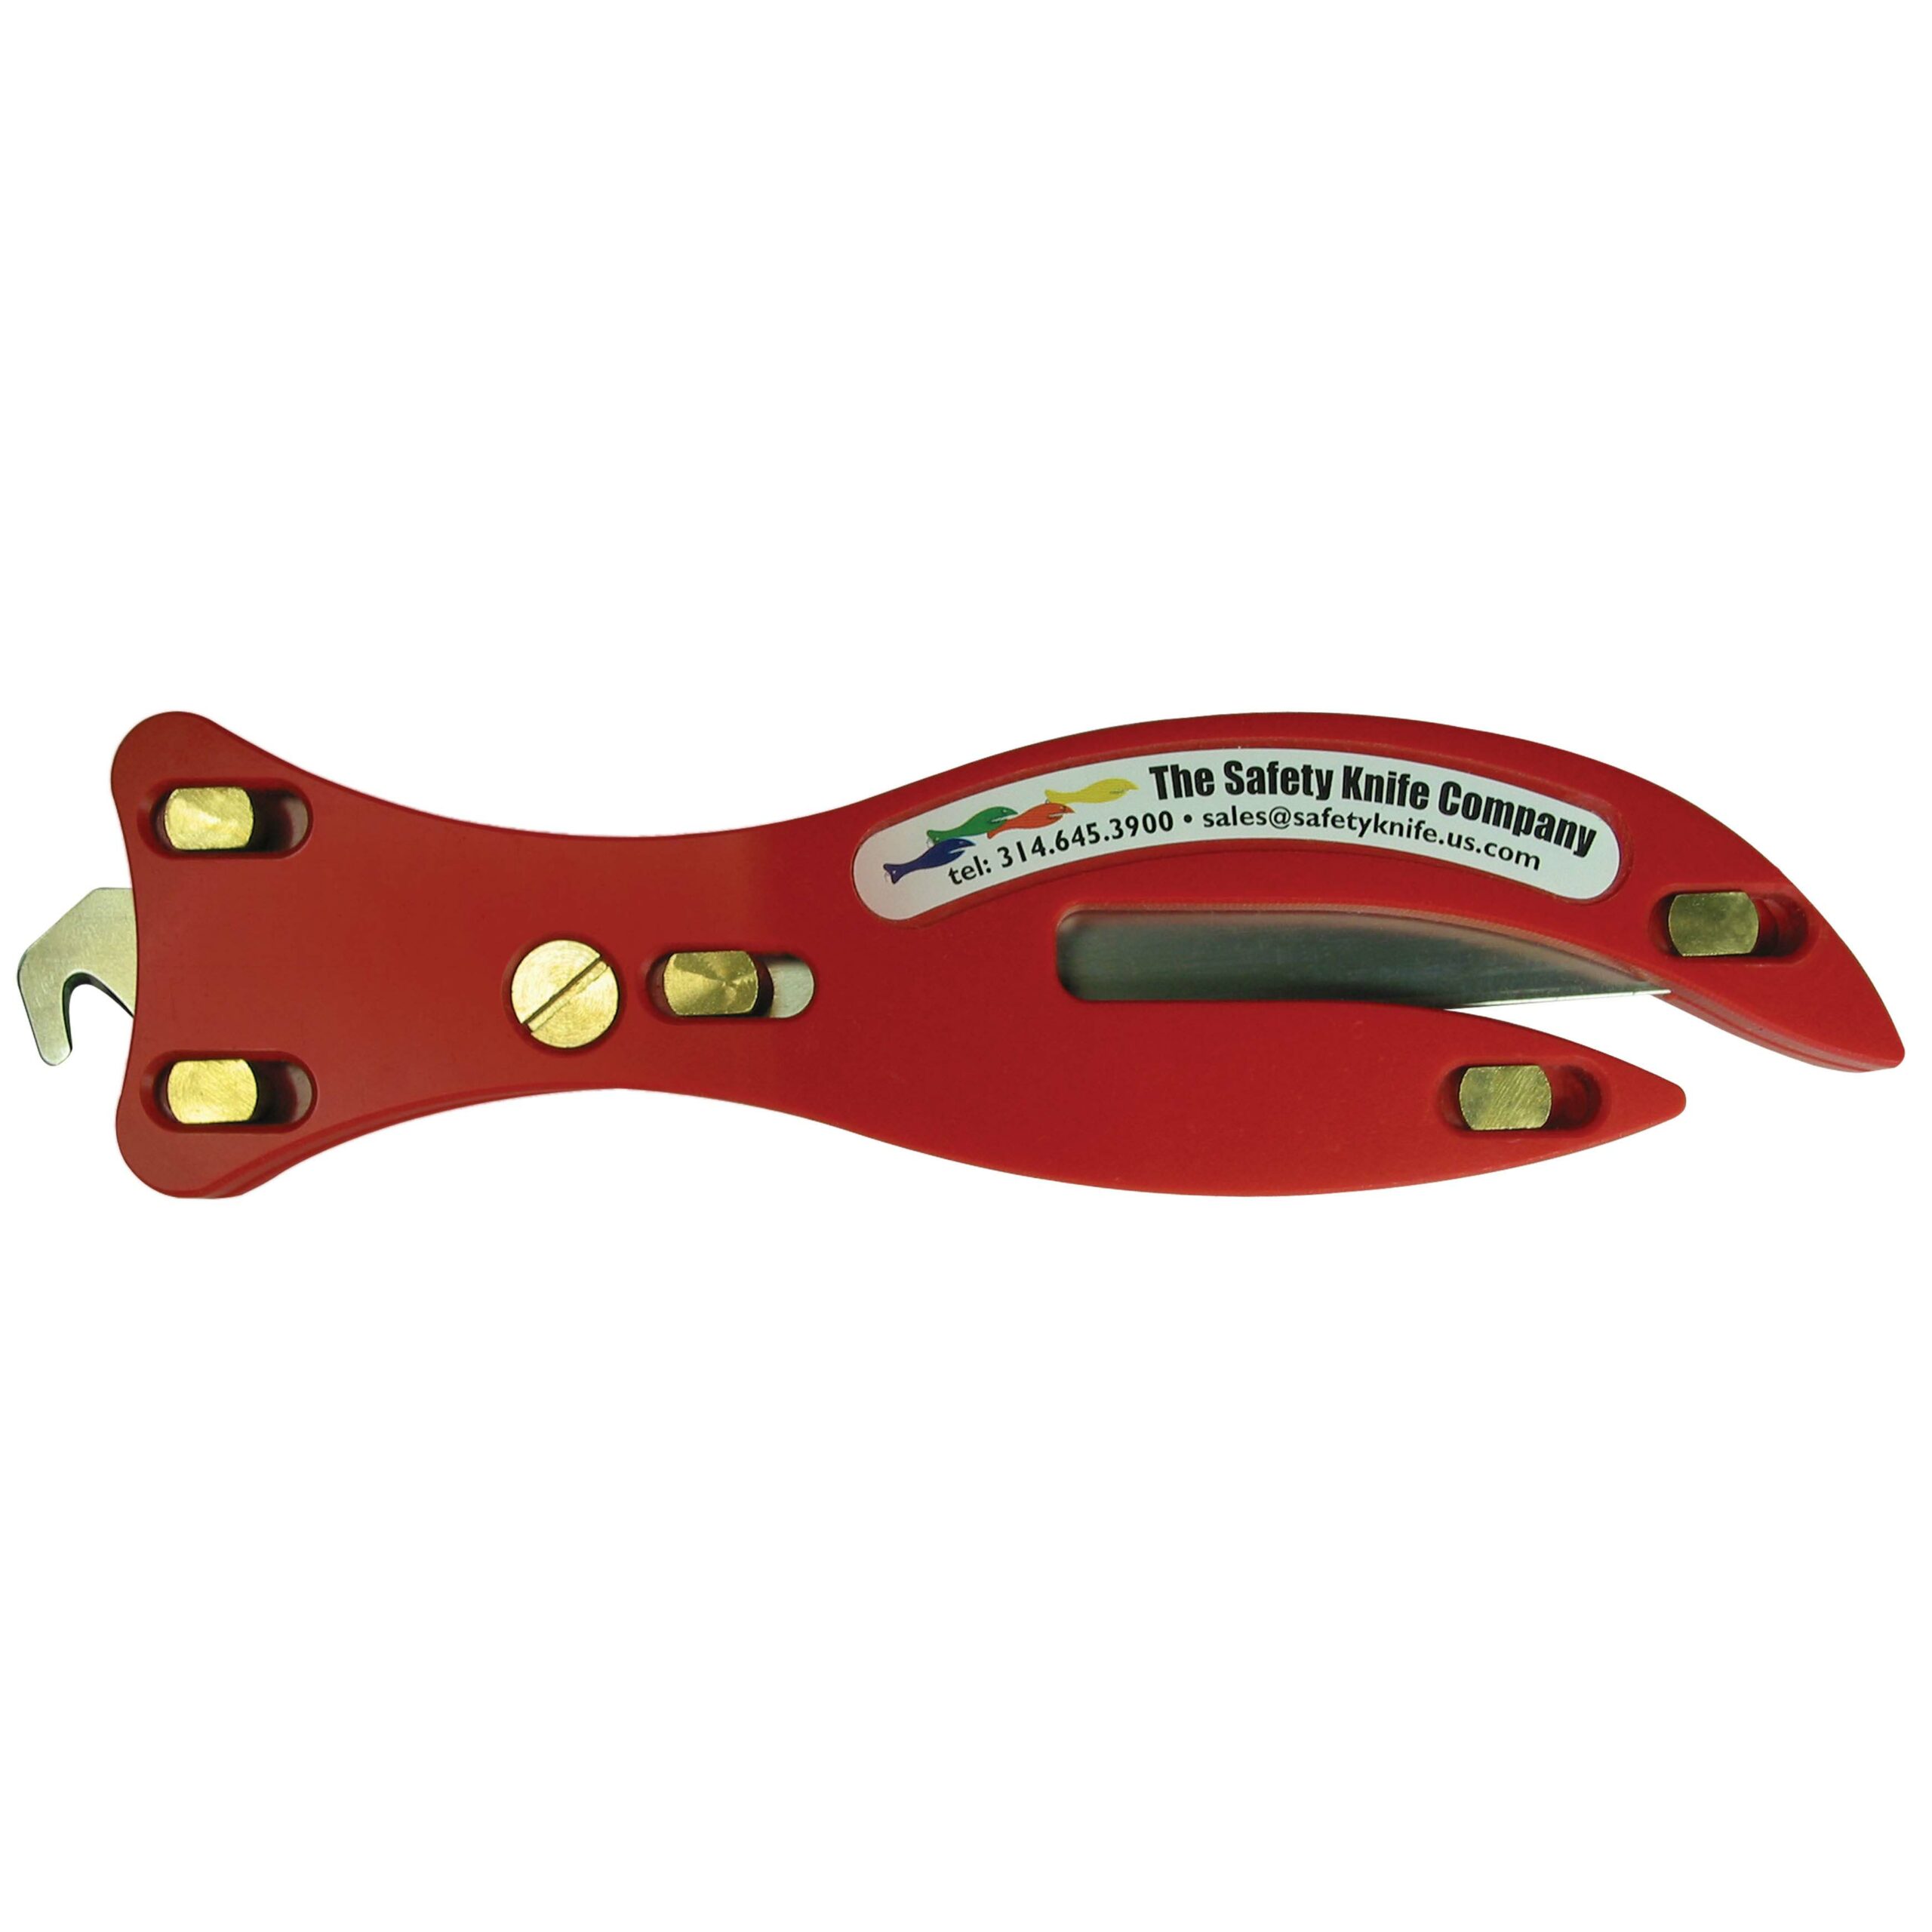 Hook Blade Safety Knife, Safety Products